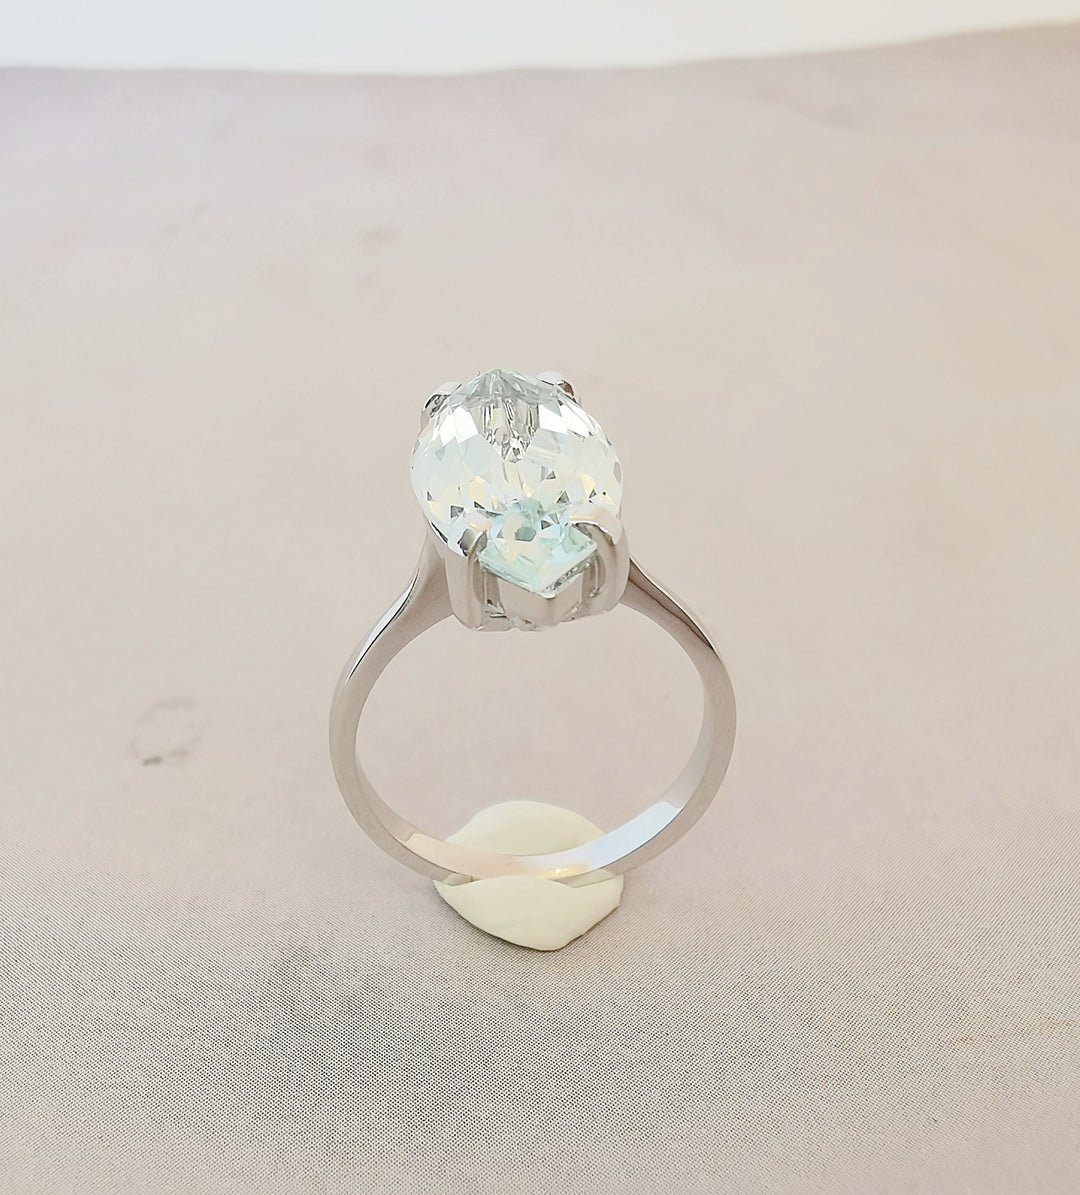 Bague / Aigue-marine taille navette / Or Blanc 18 K / (750°/°°) / 18 carats